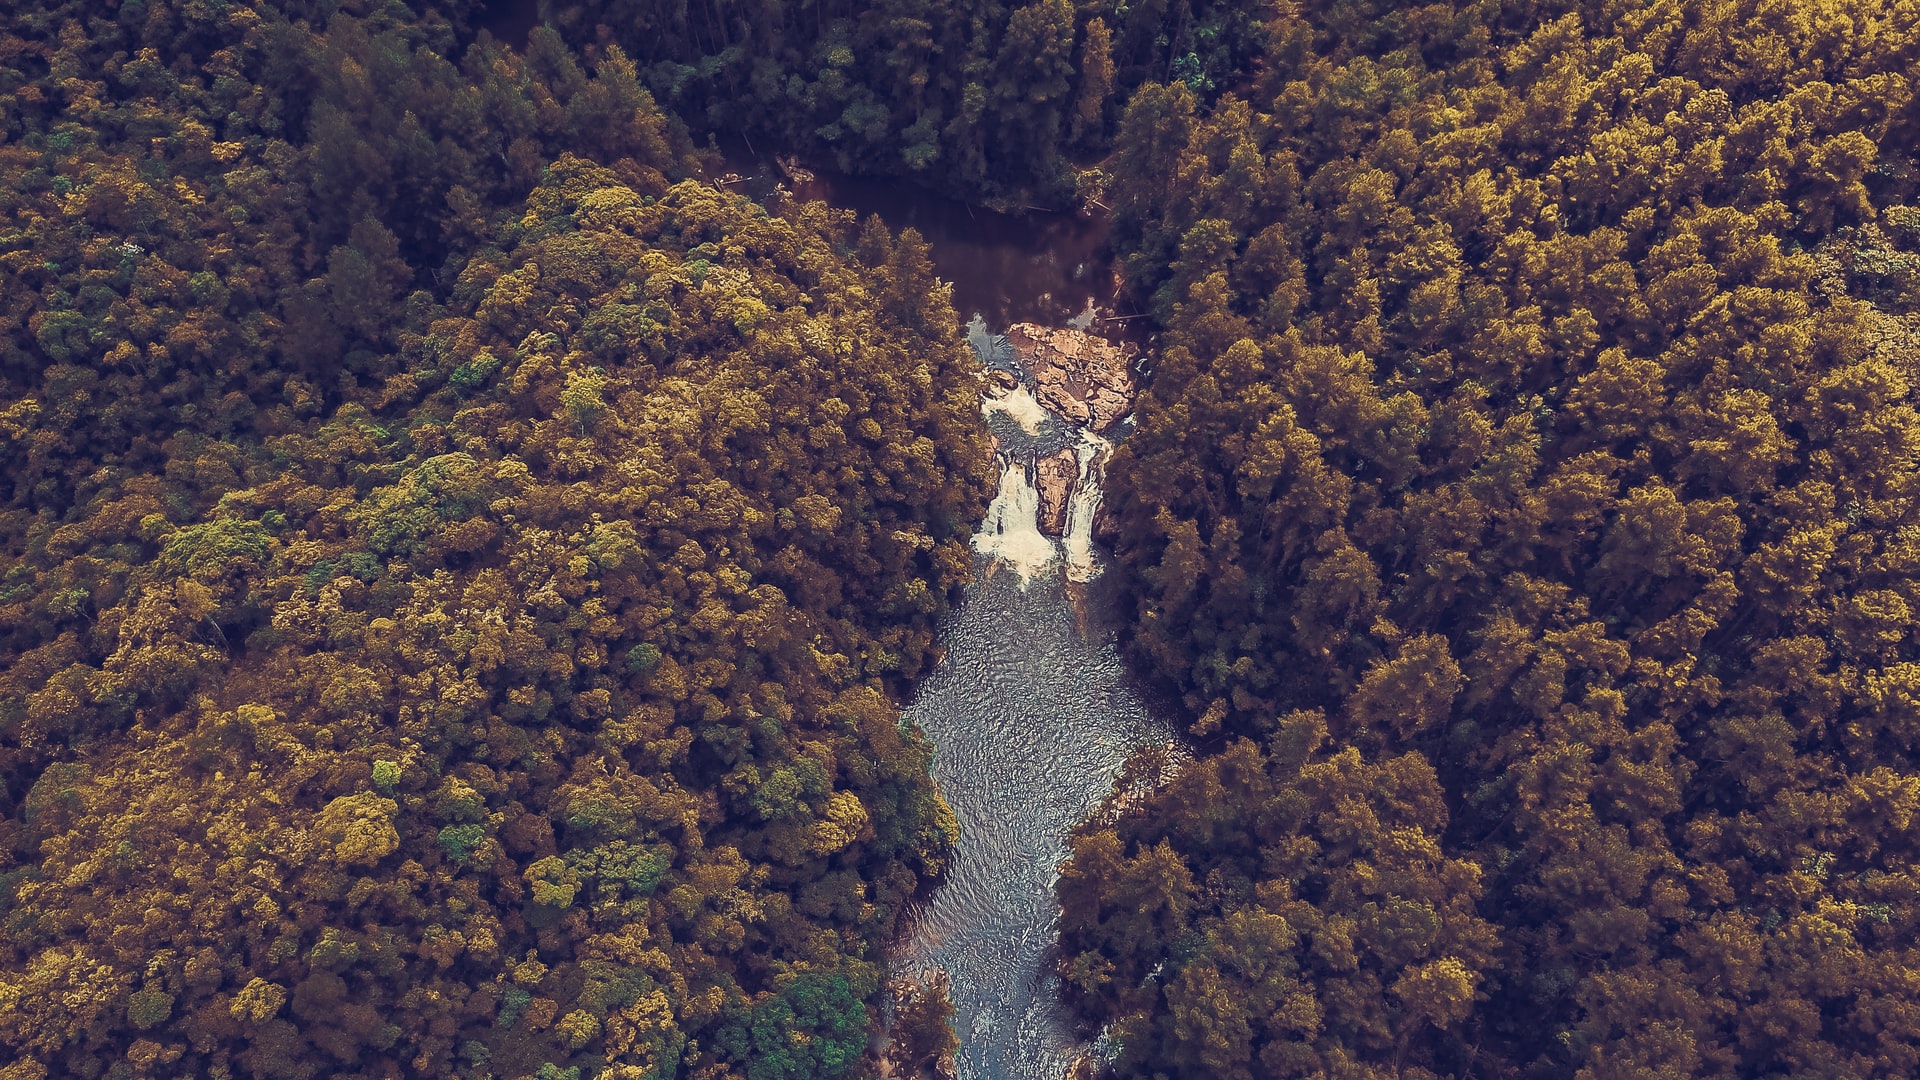 View of a river in the forest - Photo by sergio souza on Unsplash